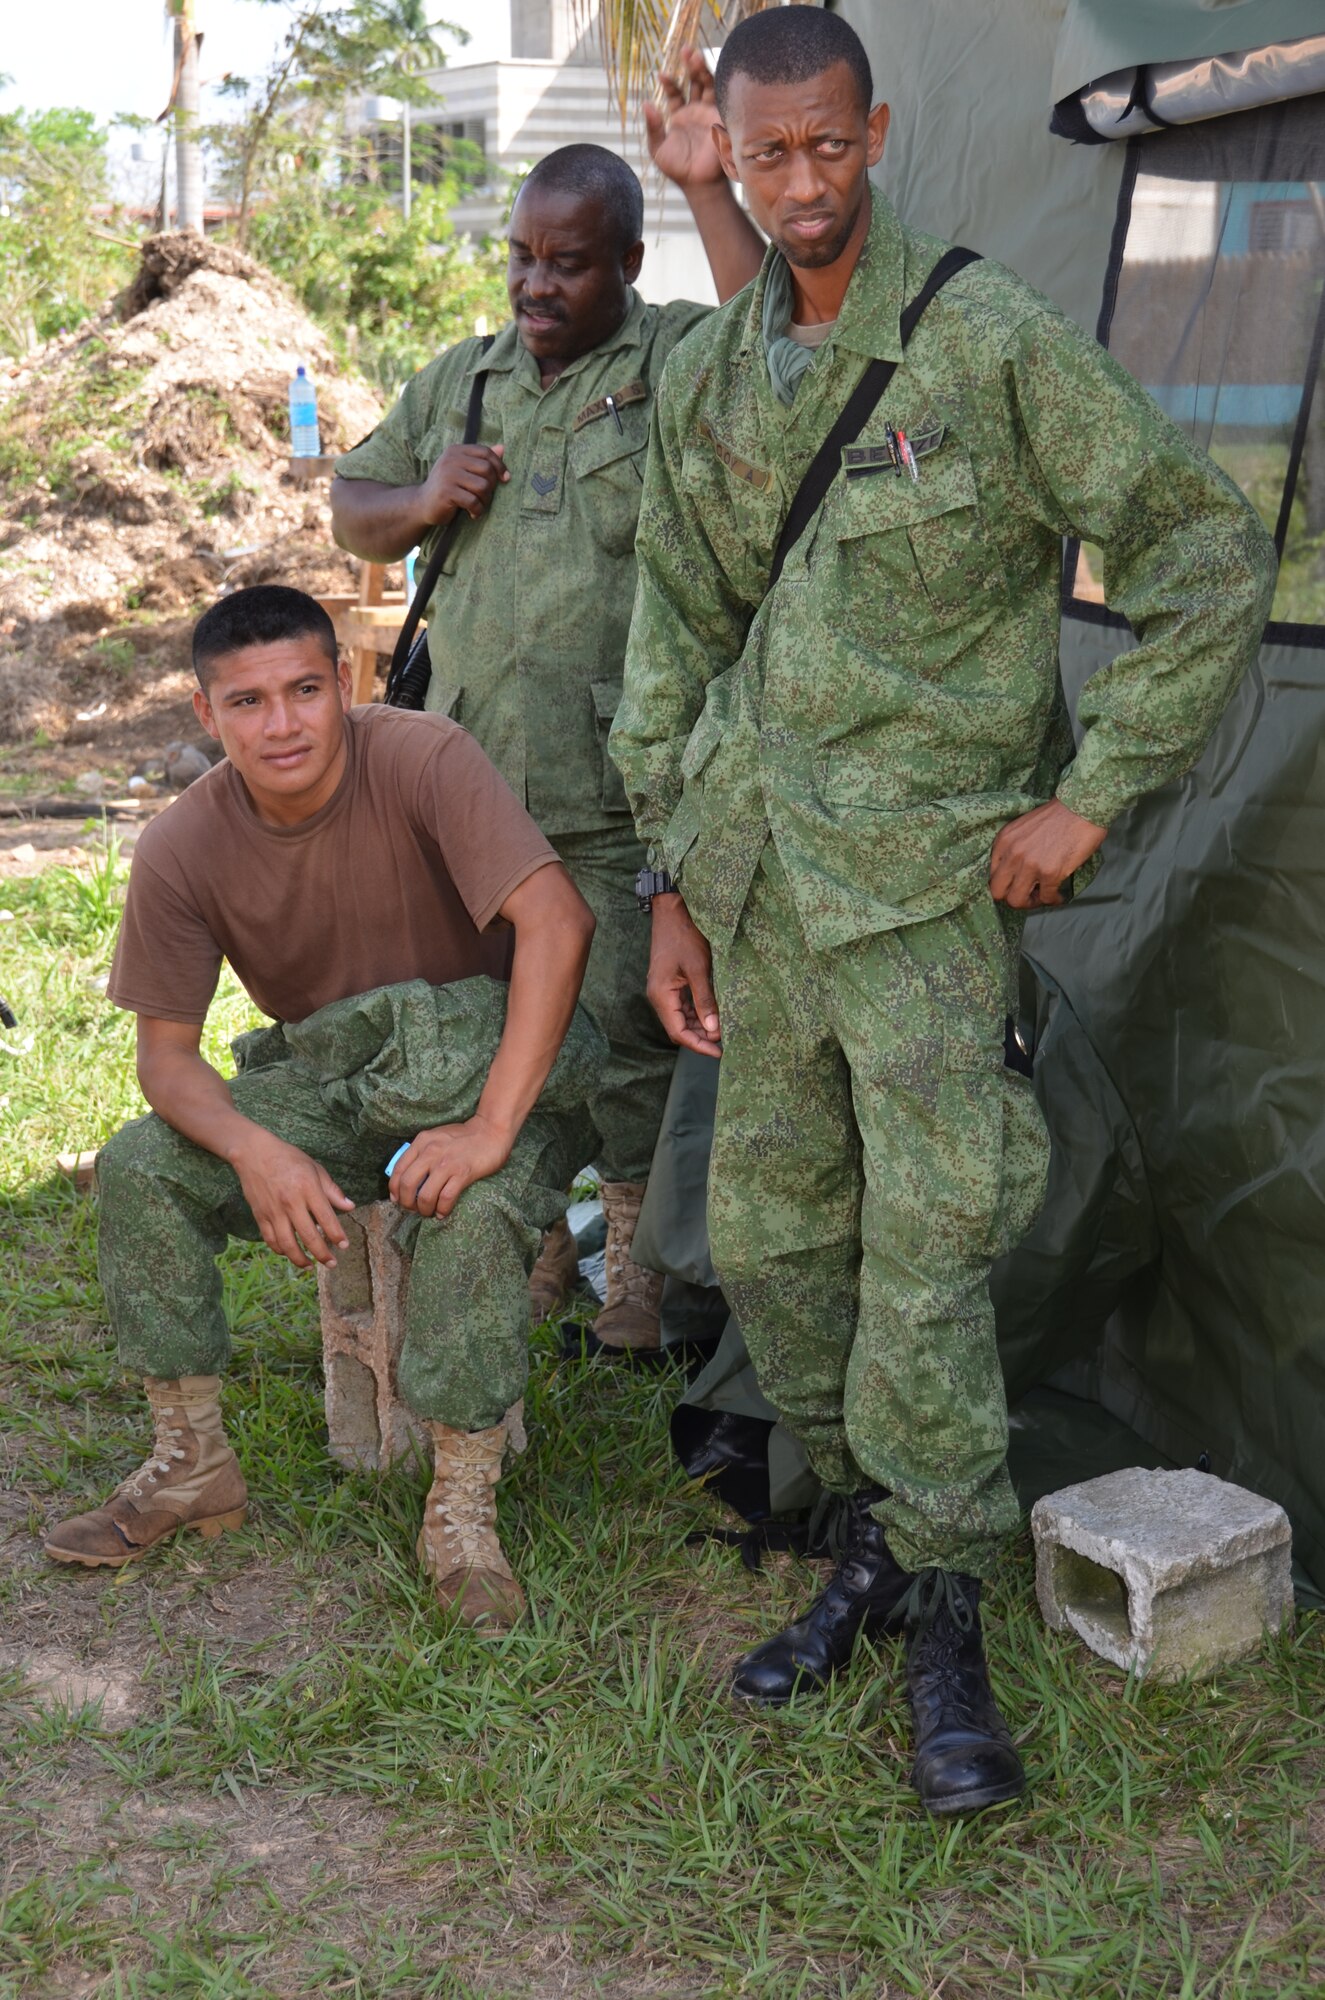 Belize Defence Force soldiers secure New Horizons equipment at the Belmopan Hospital construction site, March 11. During the past 20 years, U.S. Southern Command has worked side-by-side with the Belize Defence Force as well as the Ministries of Health and Education to conduct combined exercises to strengthen each participant's response to humanitarian relief scenarios. (USAF photo by Master Sgt. Kelly Ogden/Released)